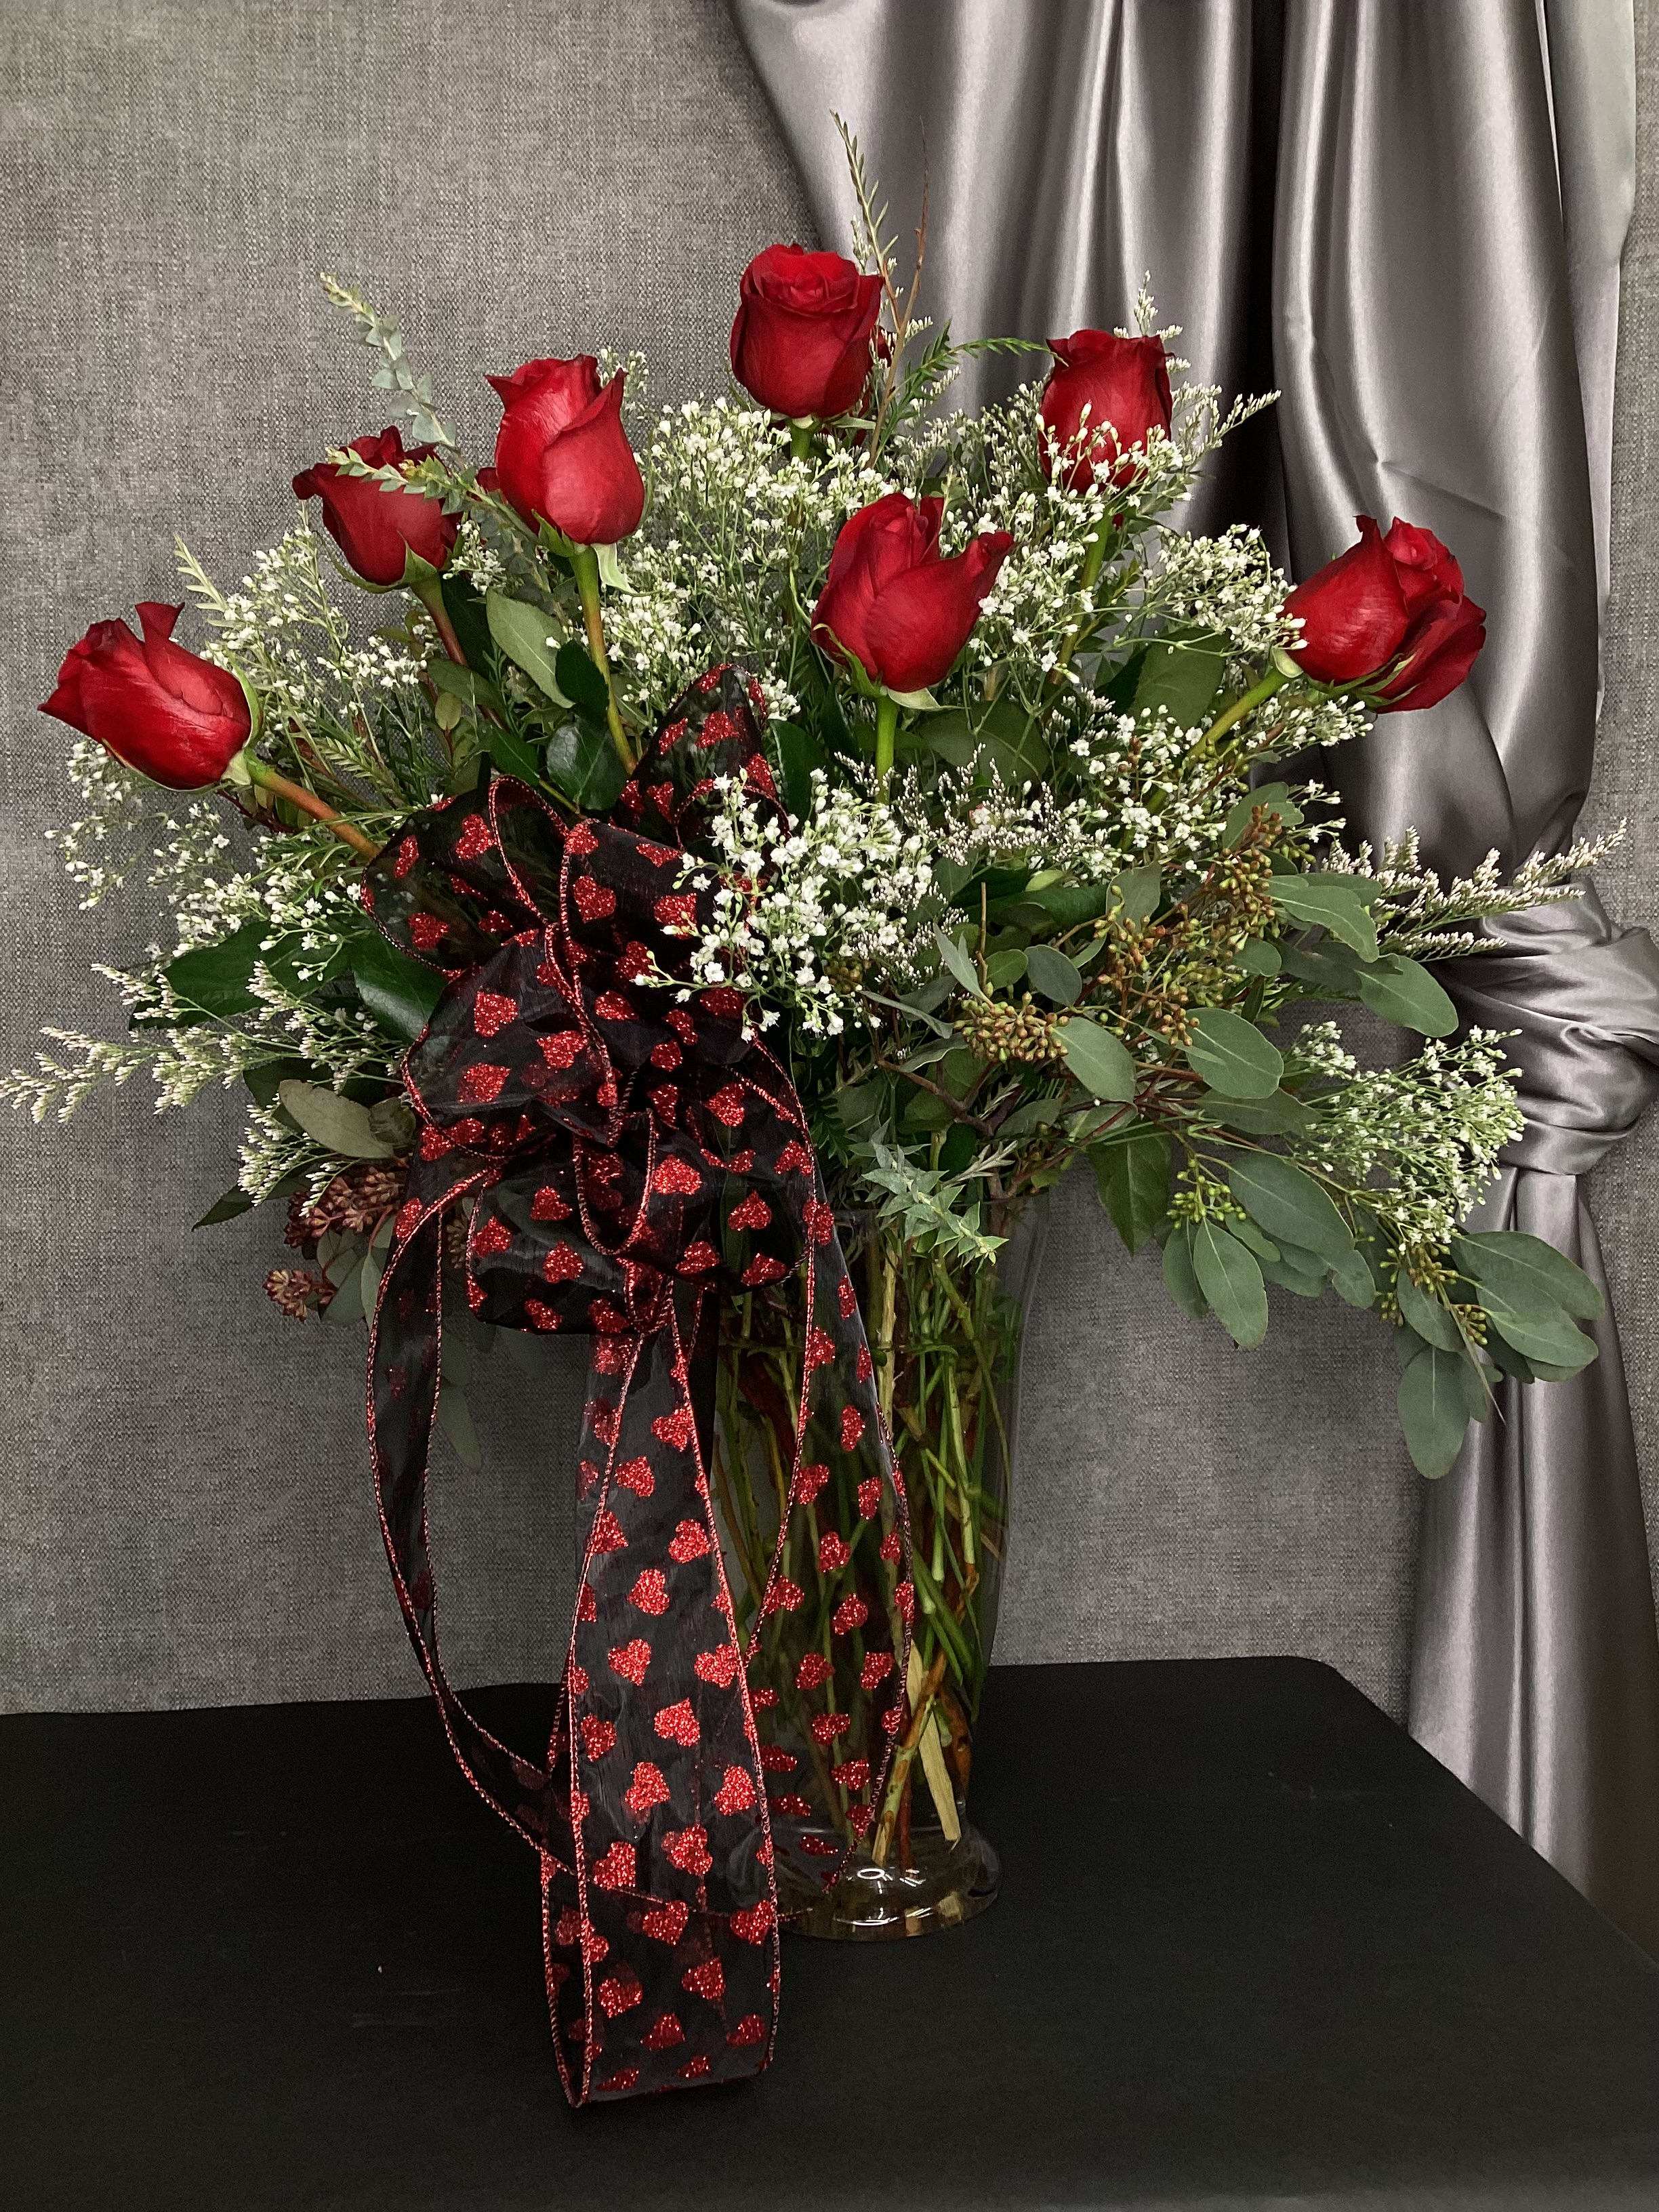 Classic Dozen Red Roses in Vase - Here is our version of the classic Dozen Rose Vase.  We use an upgraded vase along with different kinds of greenery including eucalyptus and mini myrtle.  A fun bow compliments the tried and true dozen rose vase.